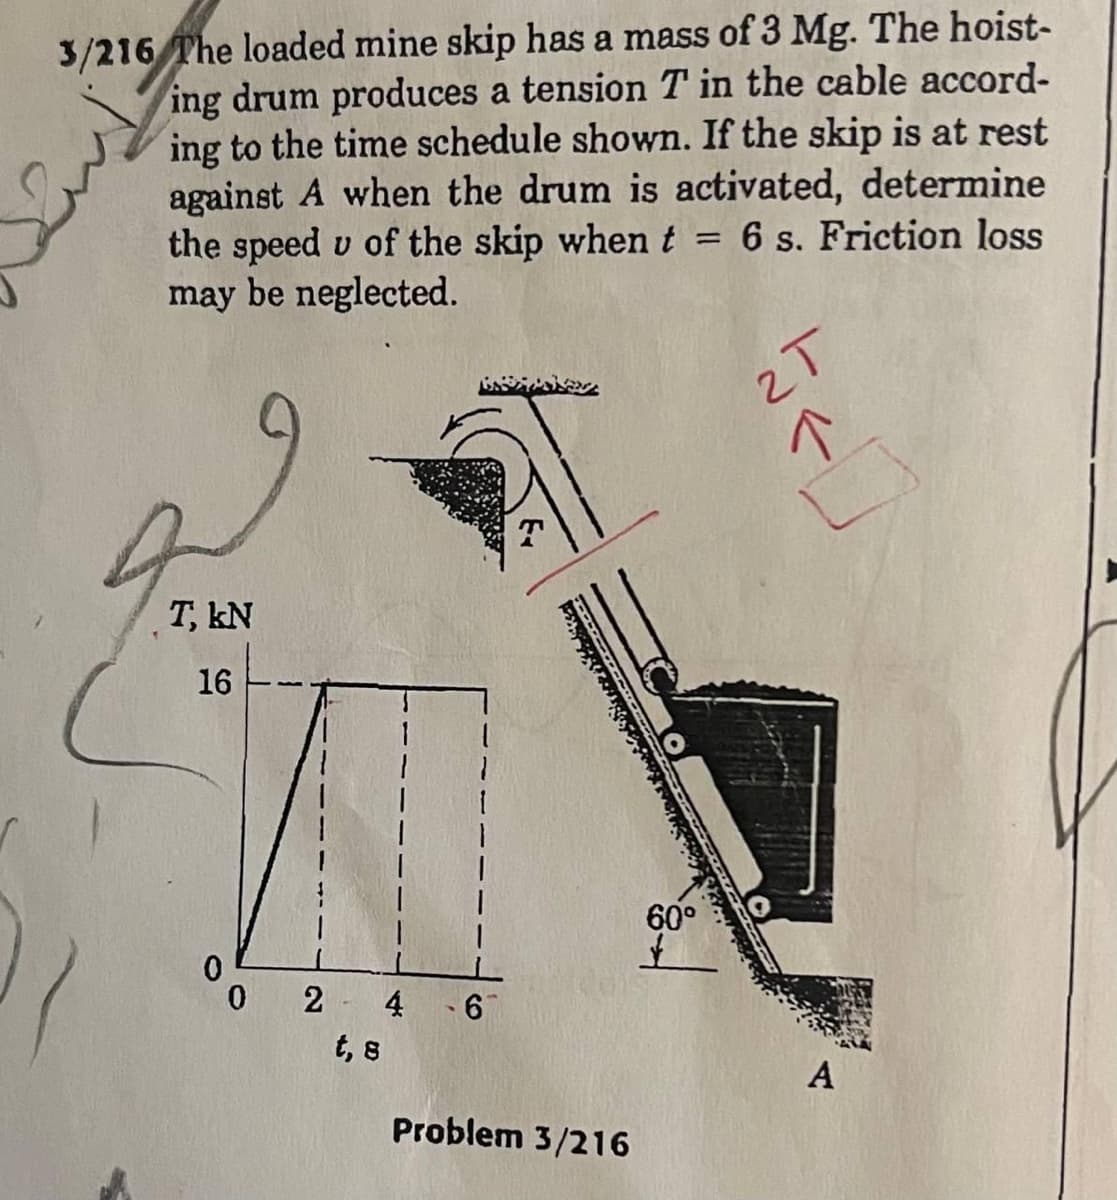 3/216 The loaded mine skip has a mass of 3 Mg. The hoist-
ing drum produces a tension T in the cable accord-
ing to the time schedule shown. If the skip is at rest
against A when the drum is activated, determine
the speed u of the skip when t = 6 s. Friction loss
may be neglected.
T, KN
16
0
0
2 4
t, s
6
Problem 3/216
60°
2T
A